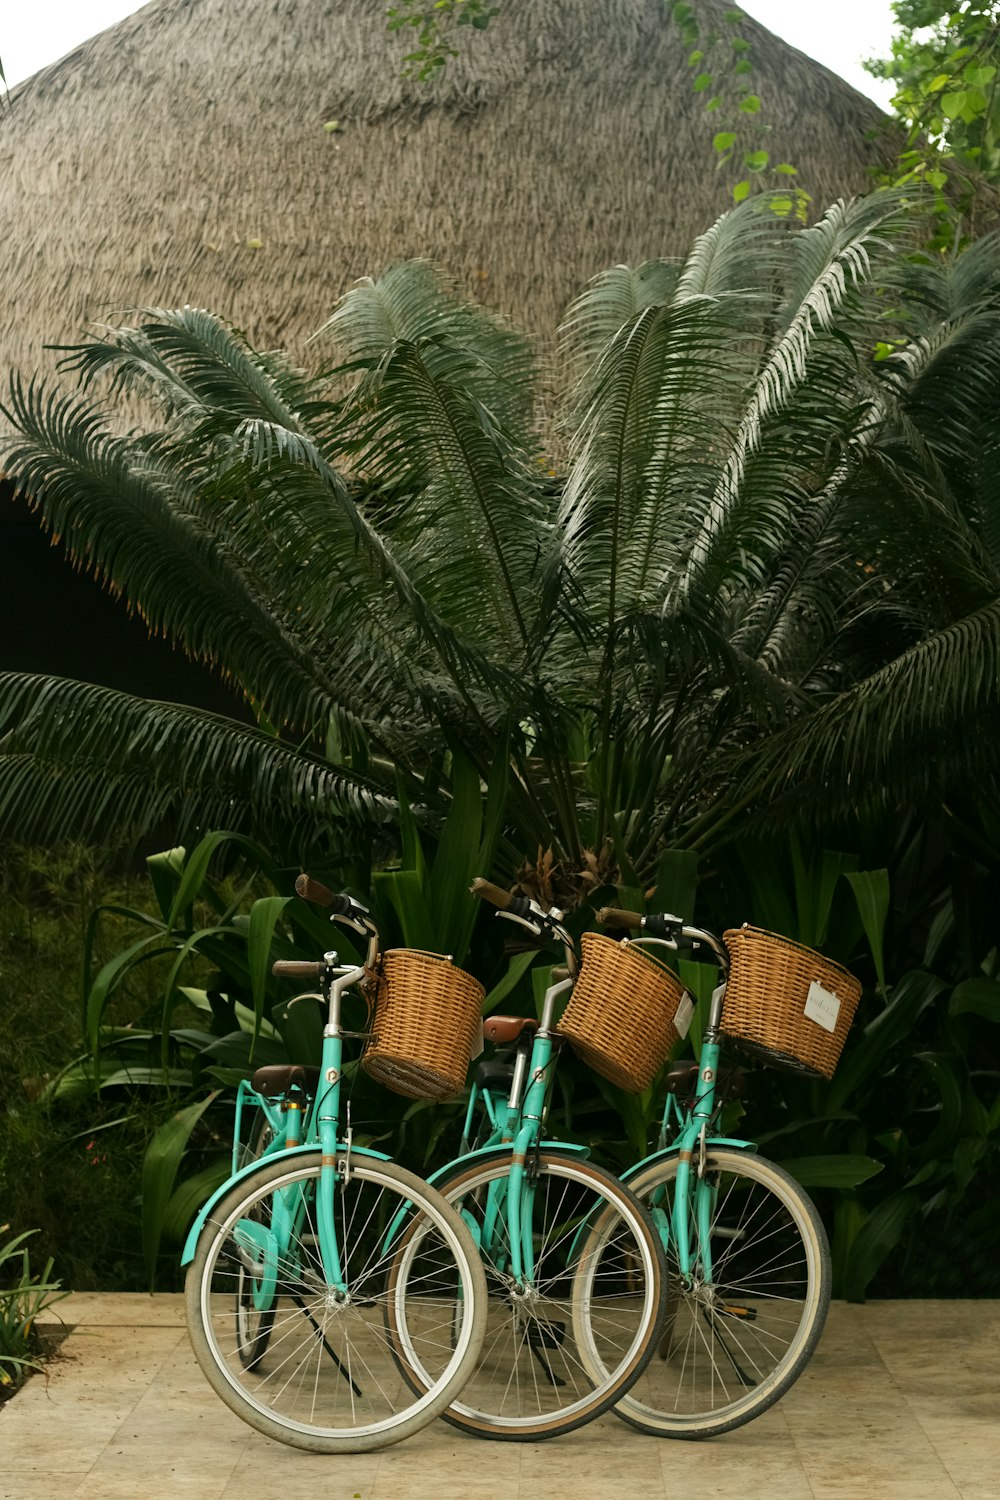 two bicycles parked next to each other in front of a palm tree